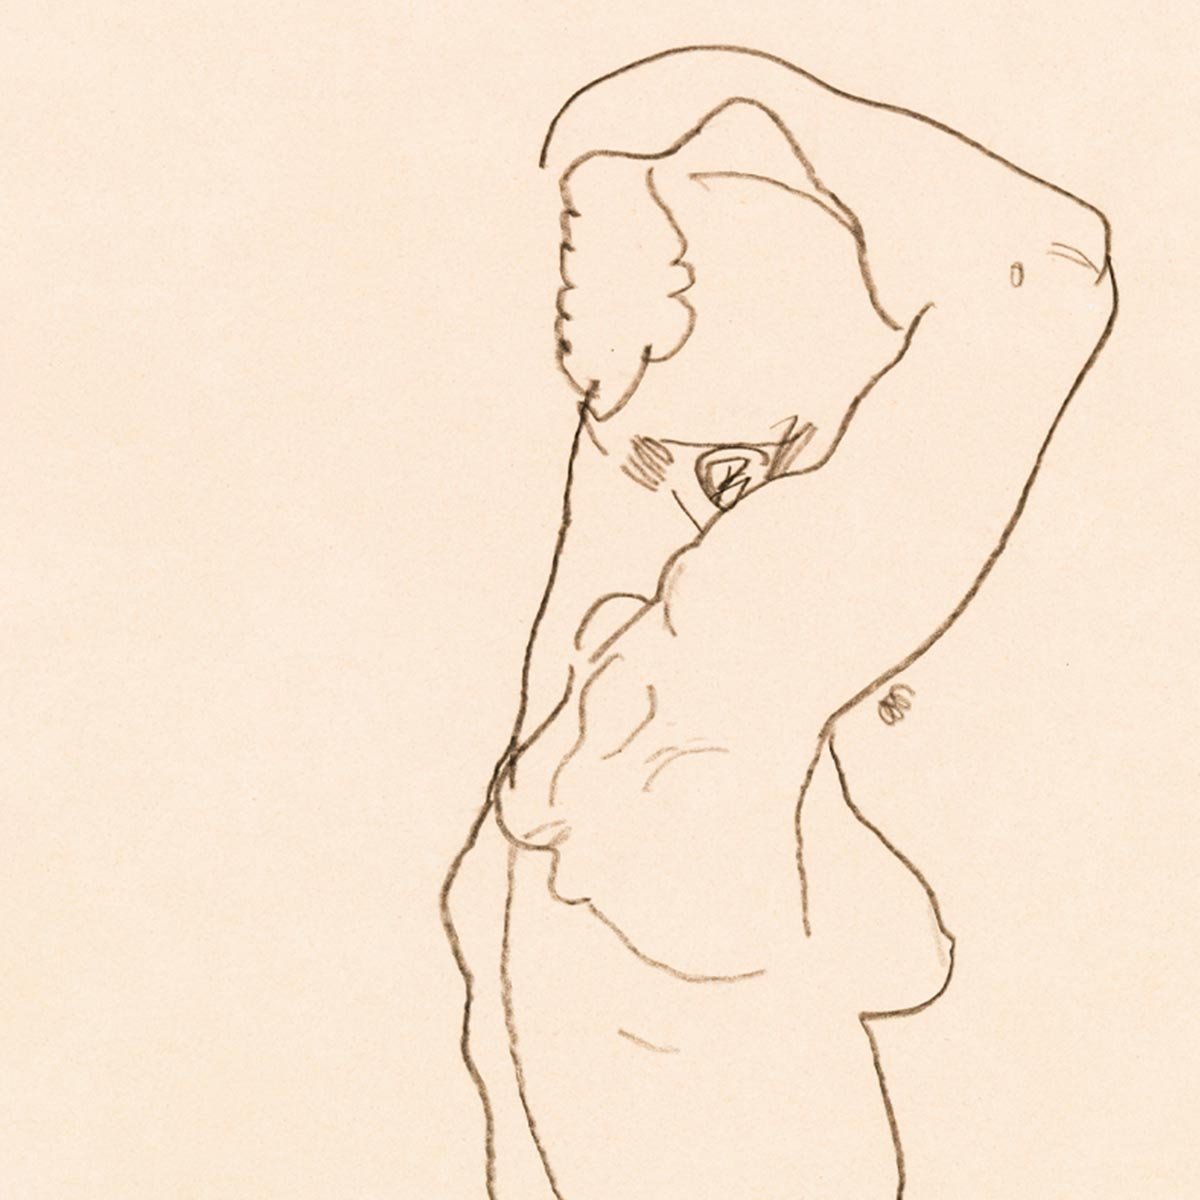 Naked Woman Nr. 1 by Egon Schiele